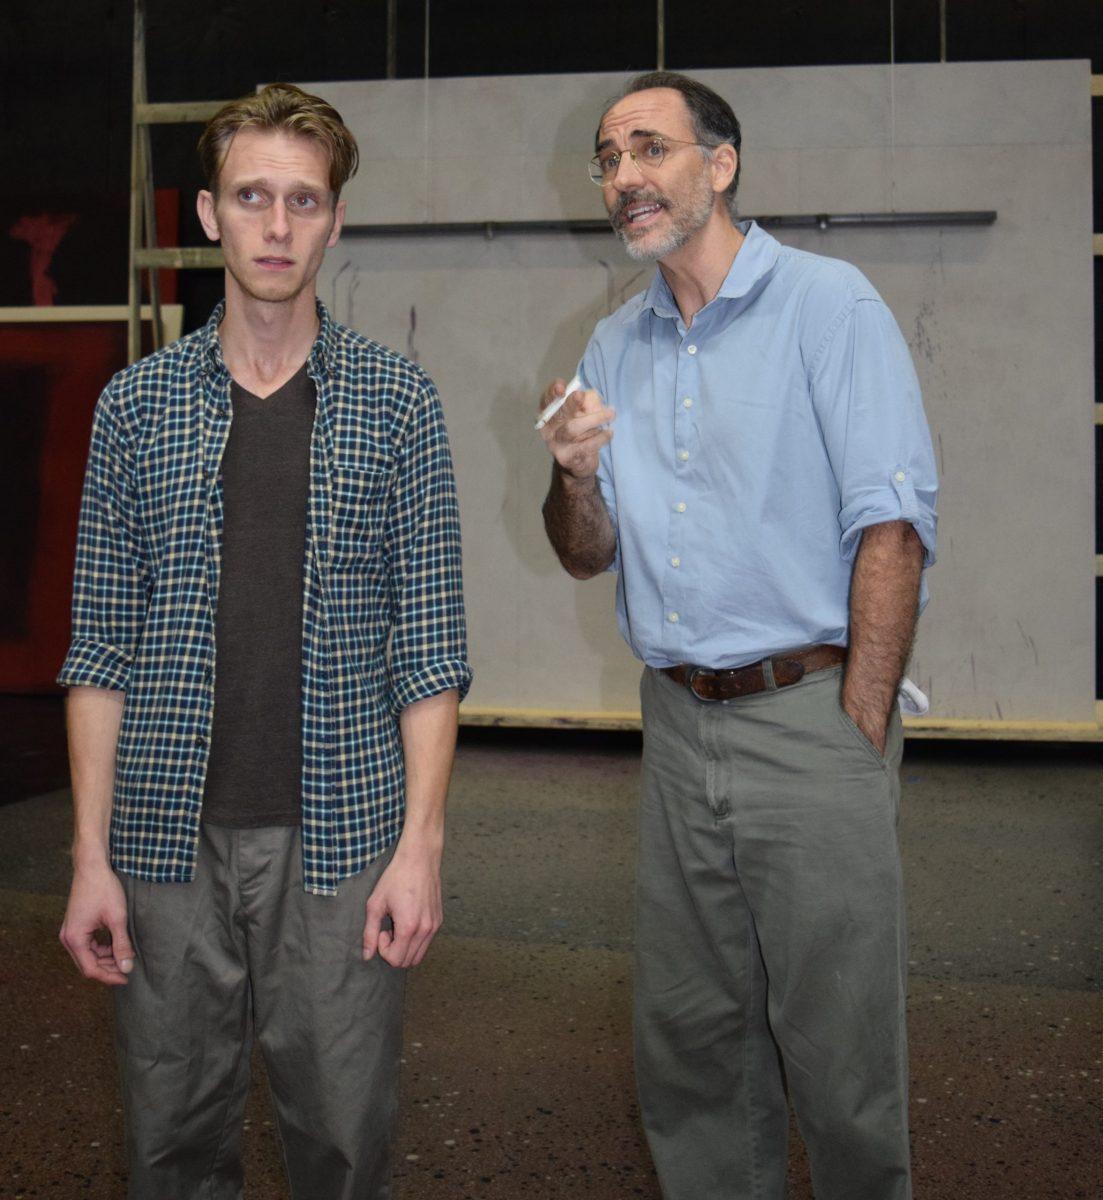 Dan Day and Tim Giles act out a scene in the play Red